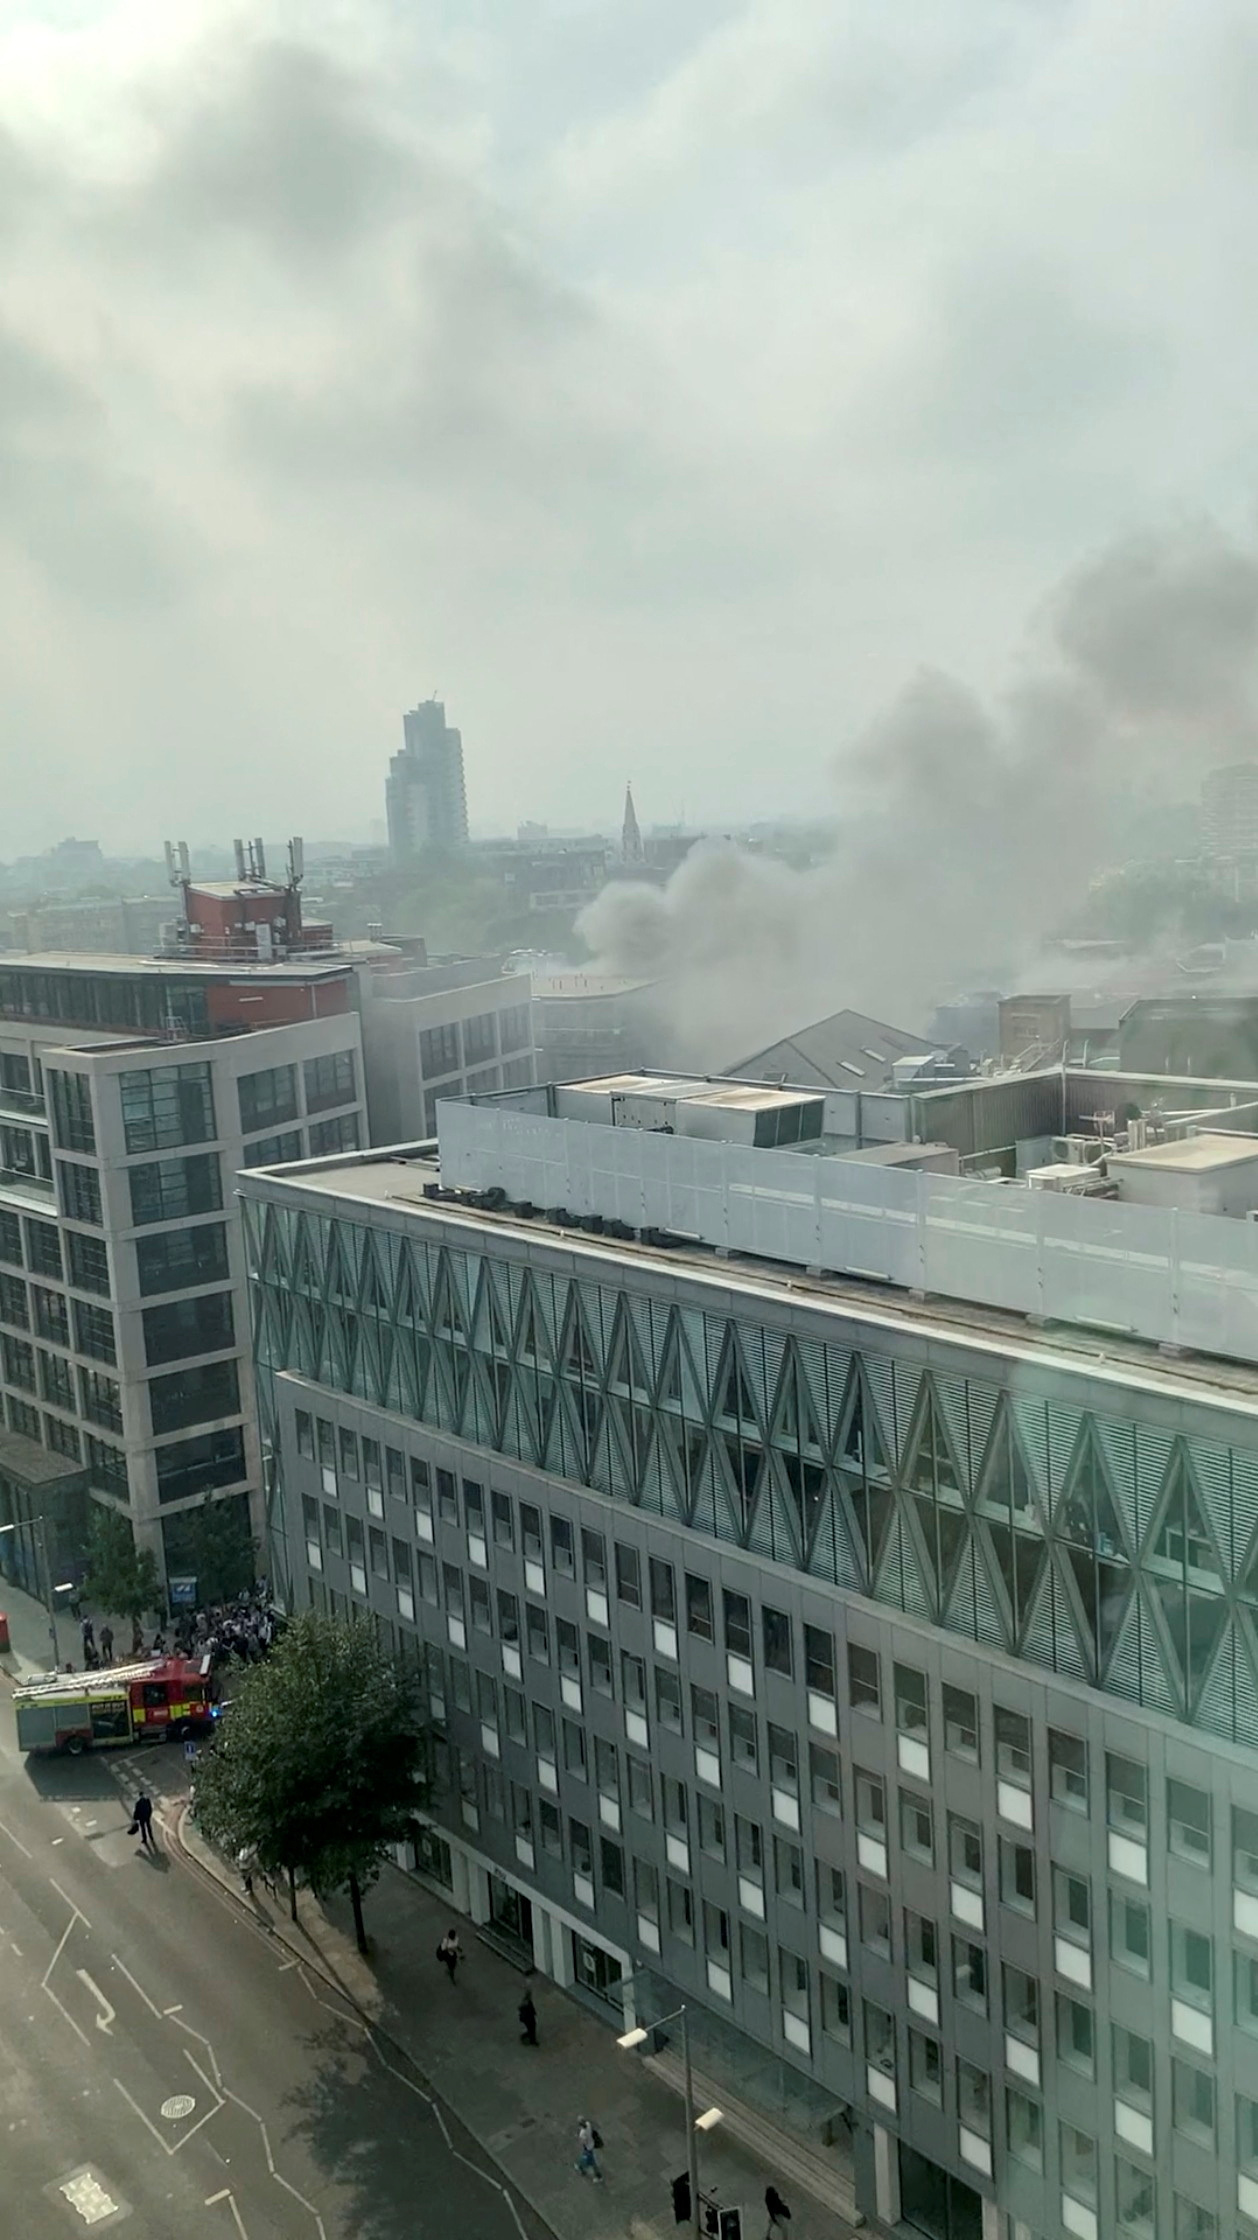 Smoke rises over the Union street after a fire broke out near the London Bridge